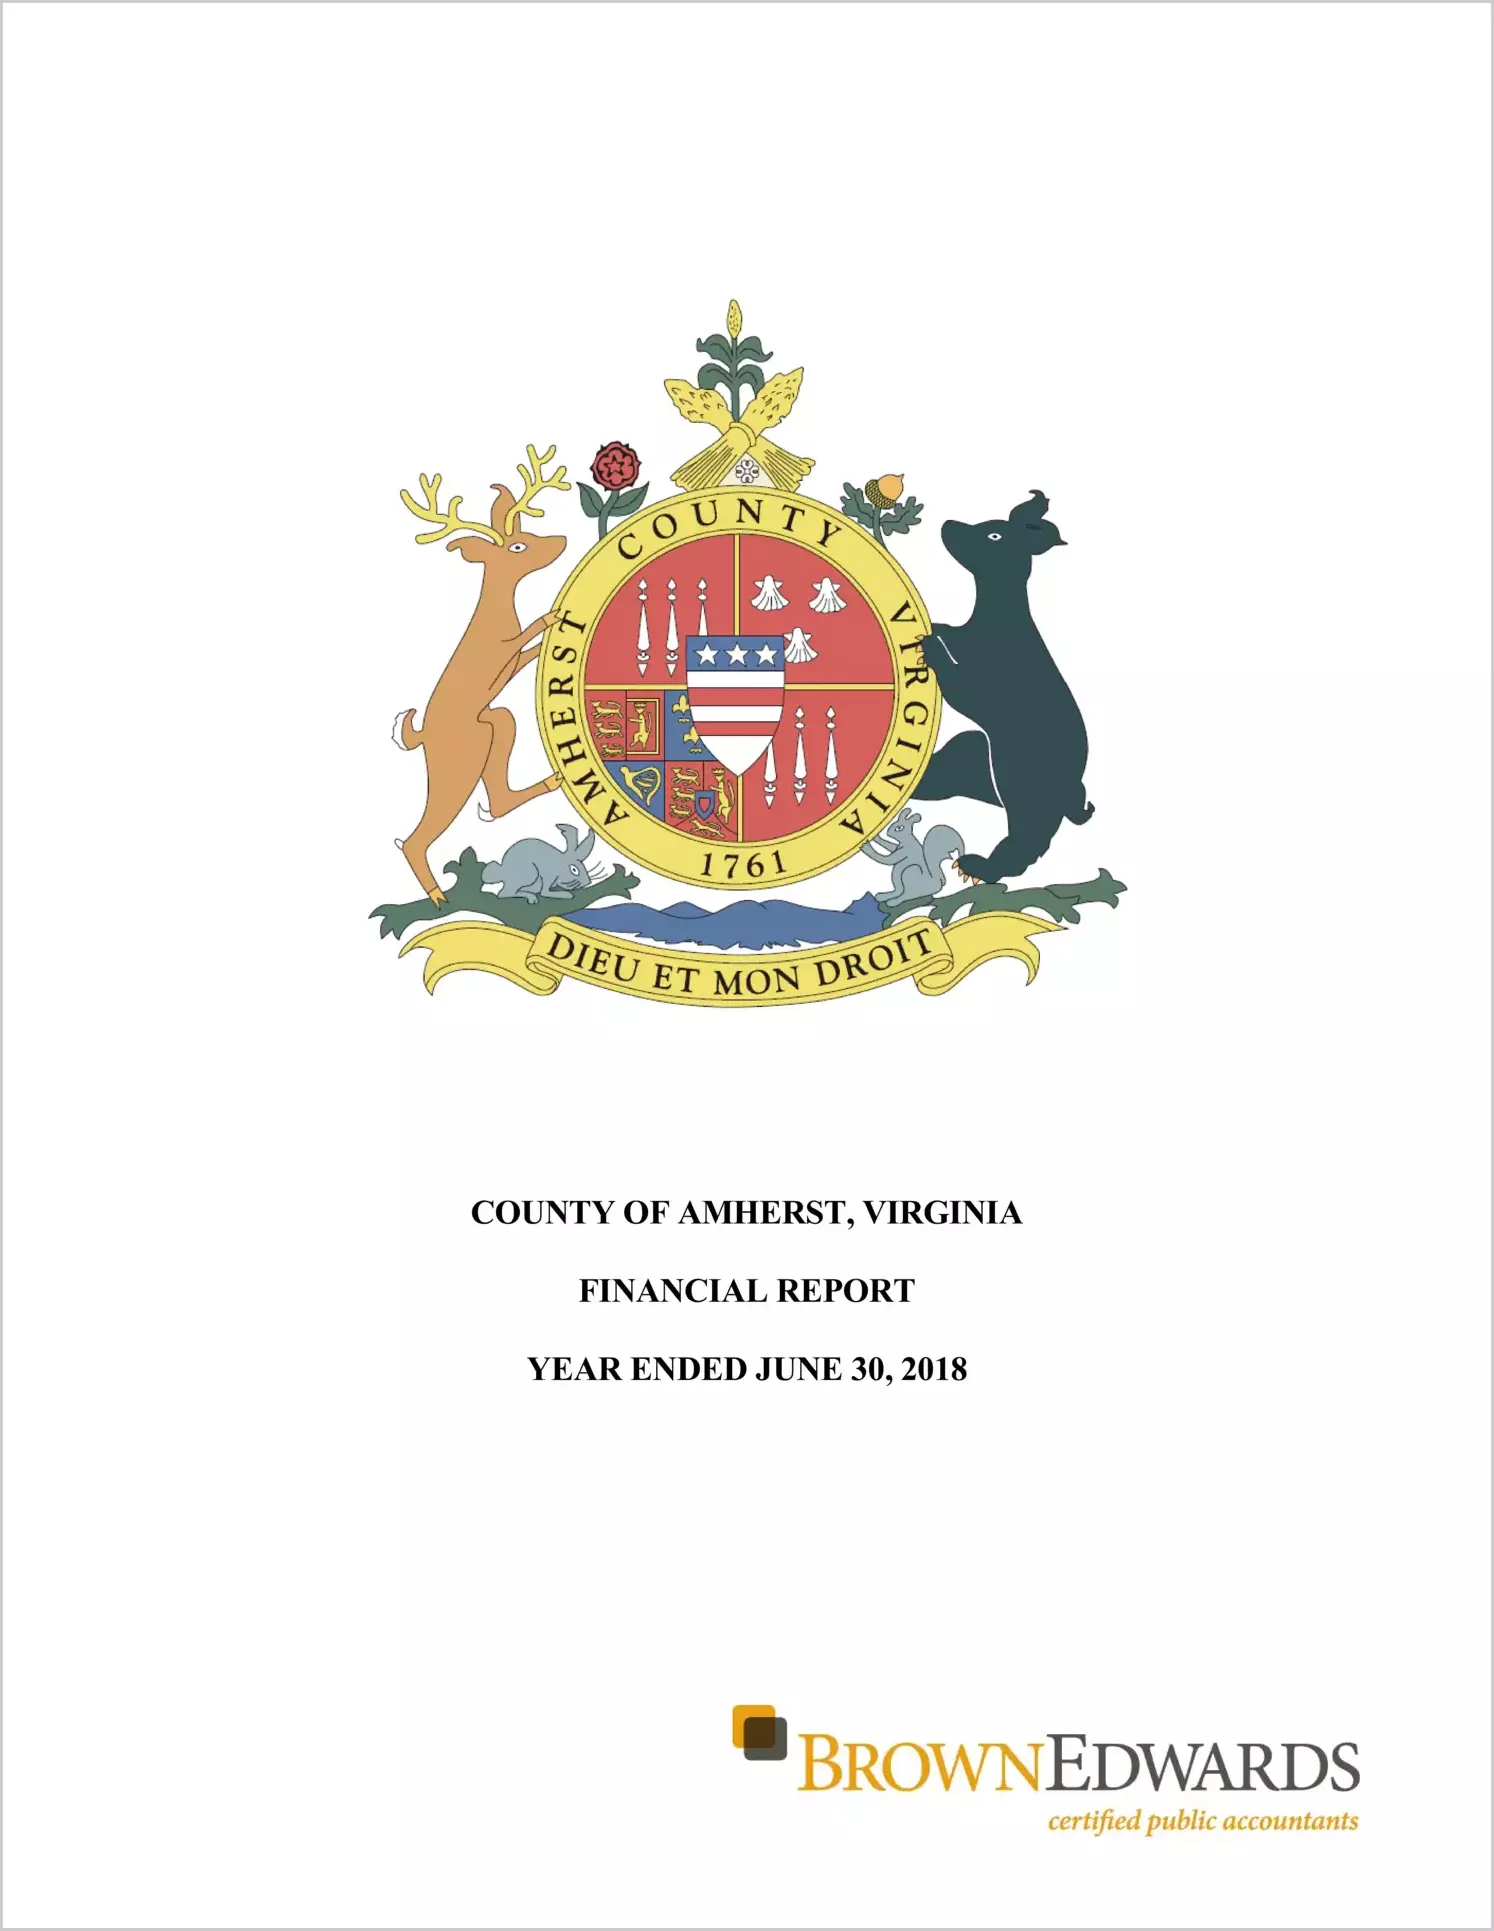 2018 Annual Financial Report for County of Amherst